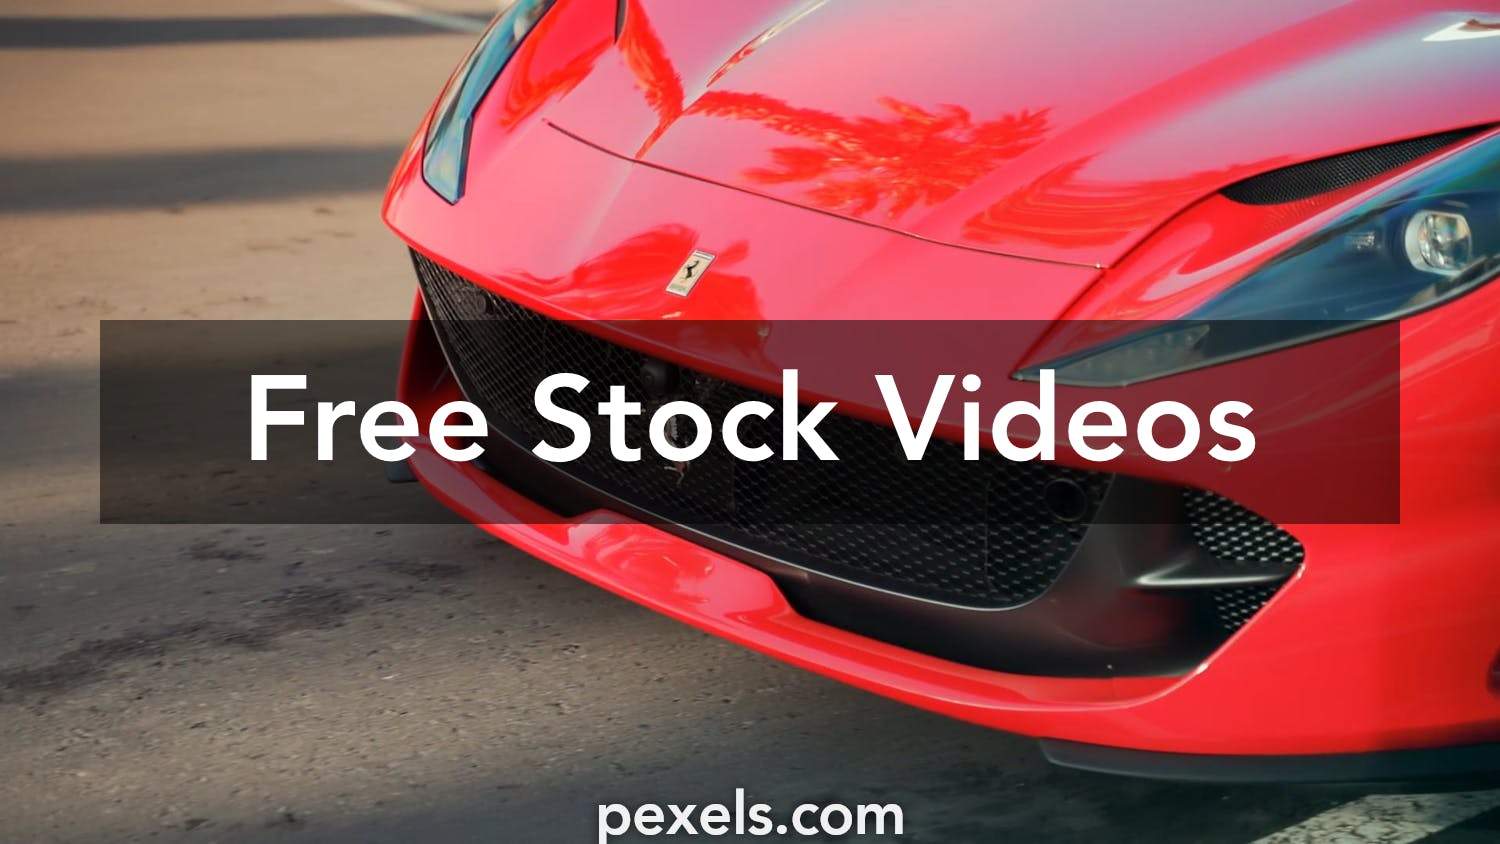 414 Ferrari Logo Stock Video Footage - 4K and HD Video Clips